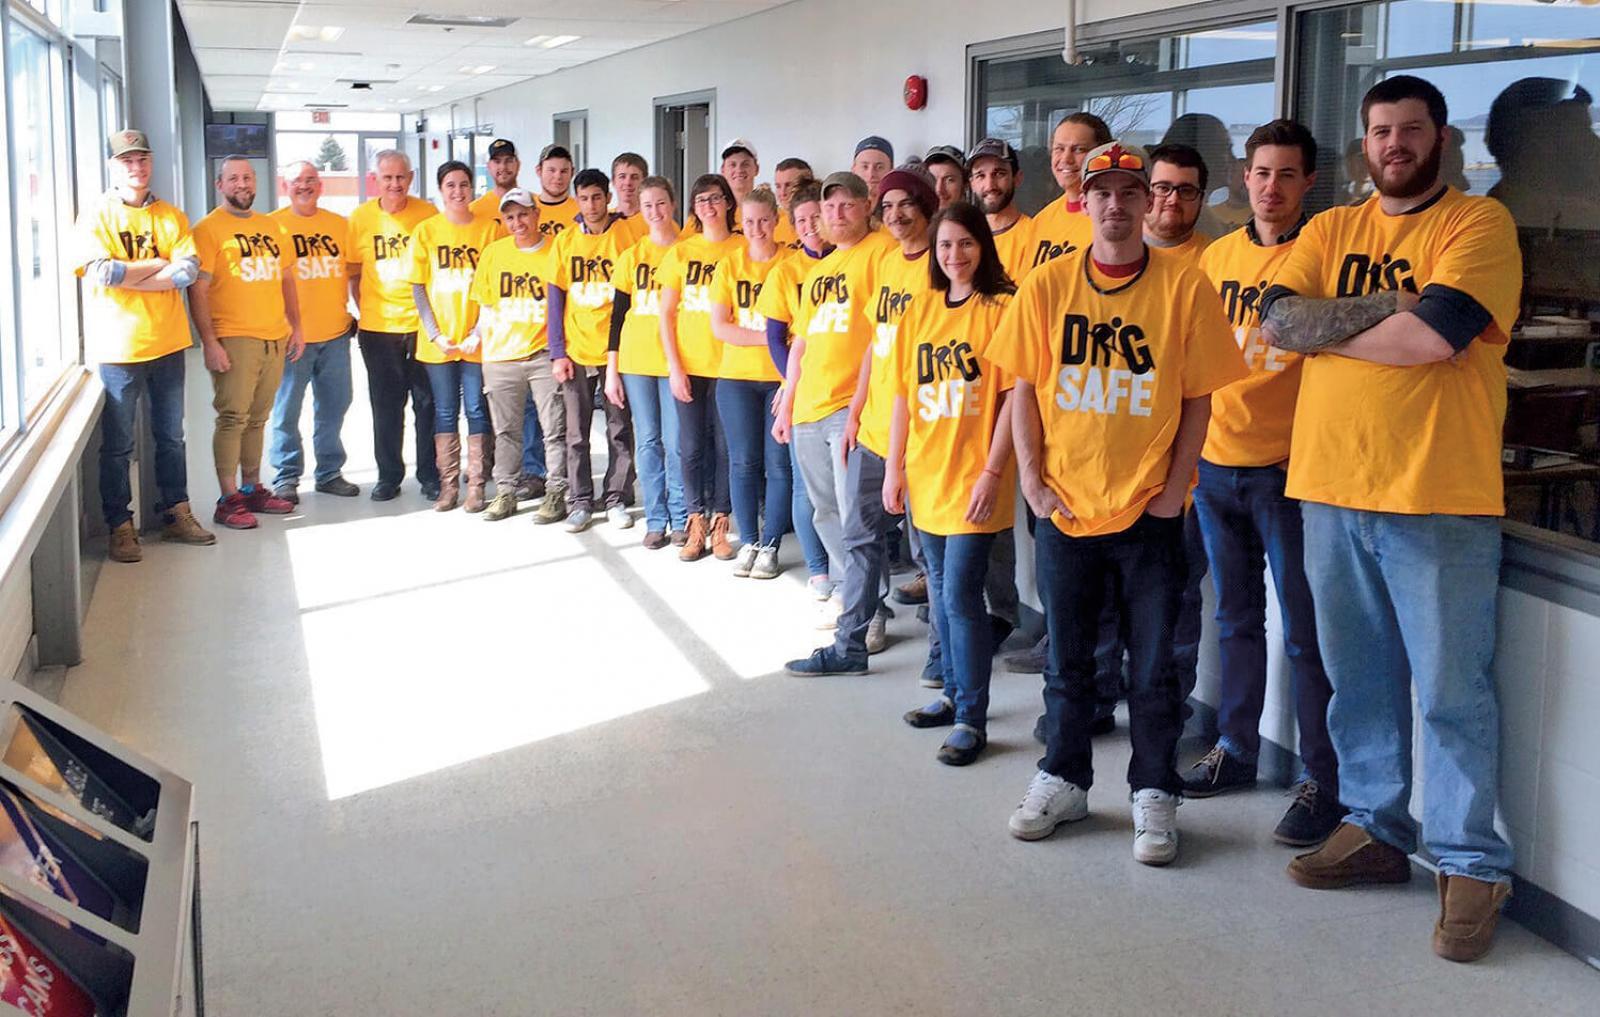 The annual Dig Safe public awareness campaign included an event at Mohawk College on Mar. 9.